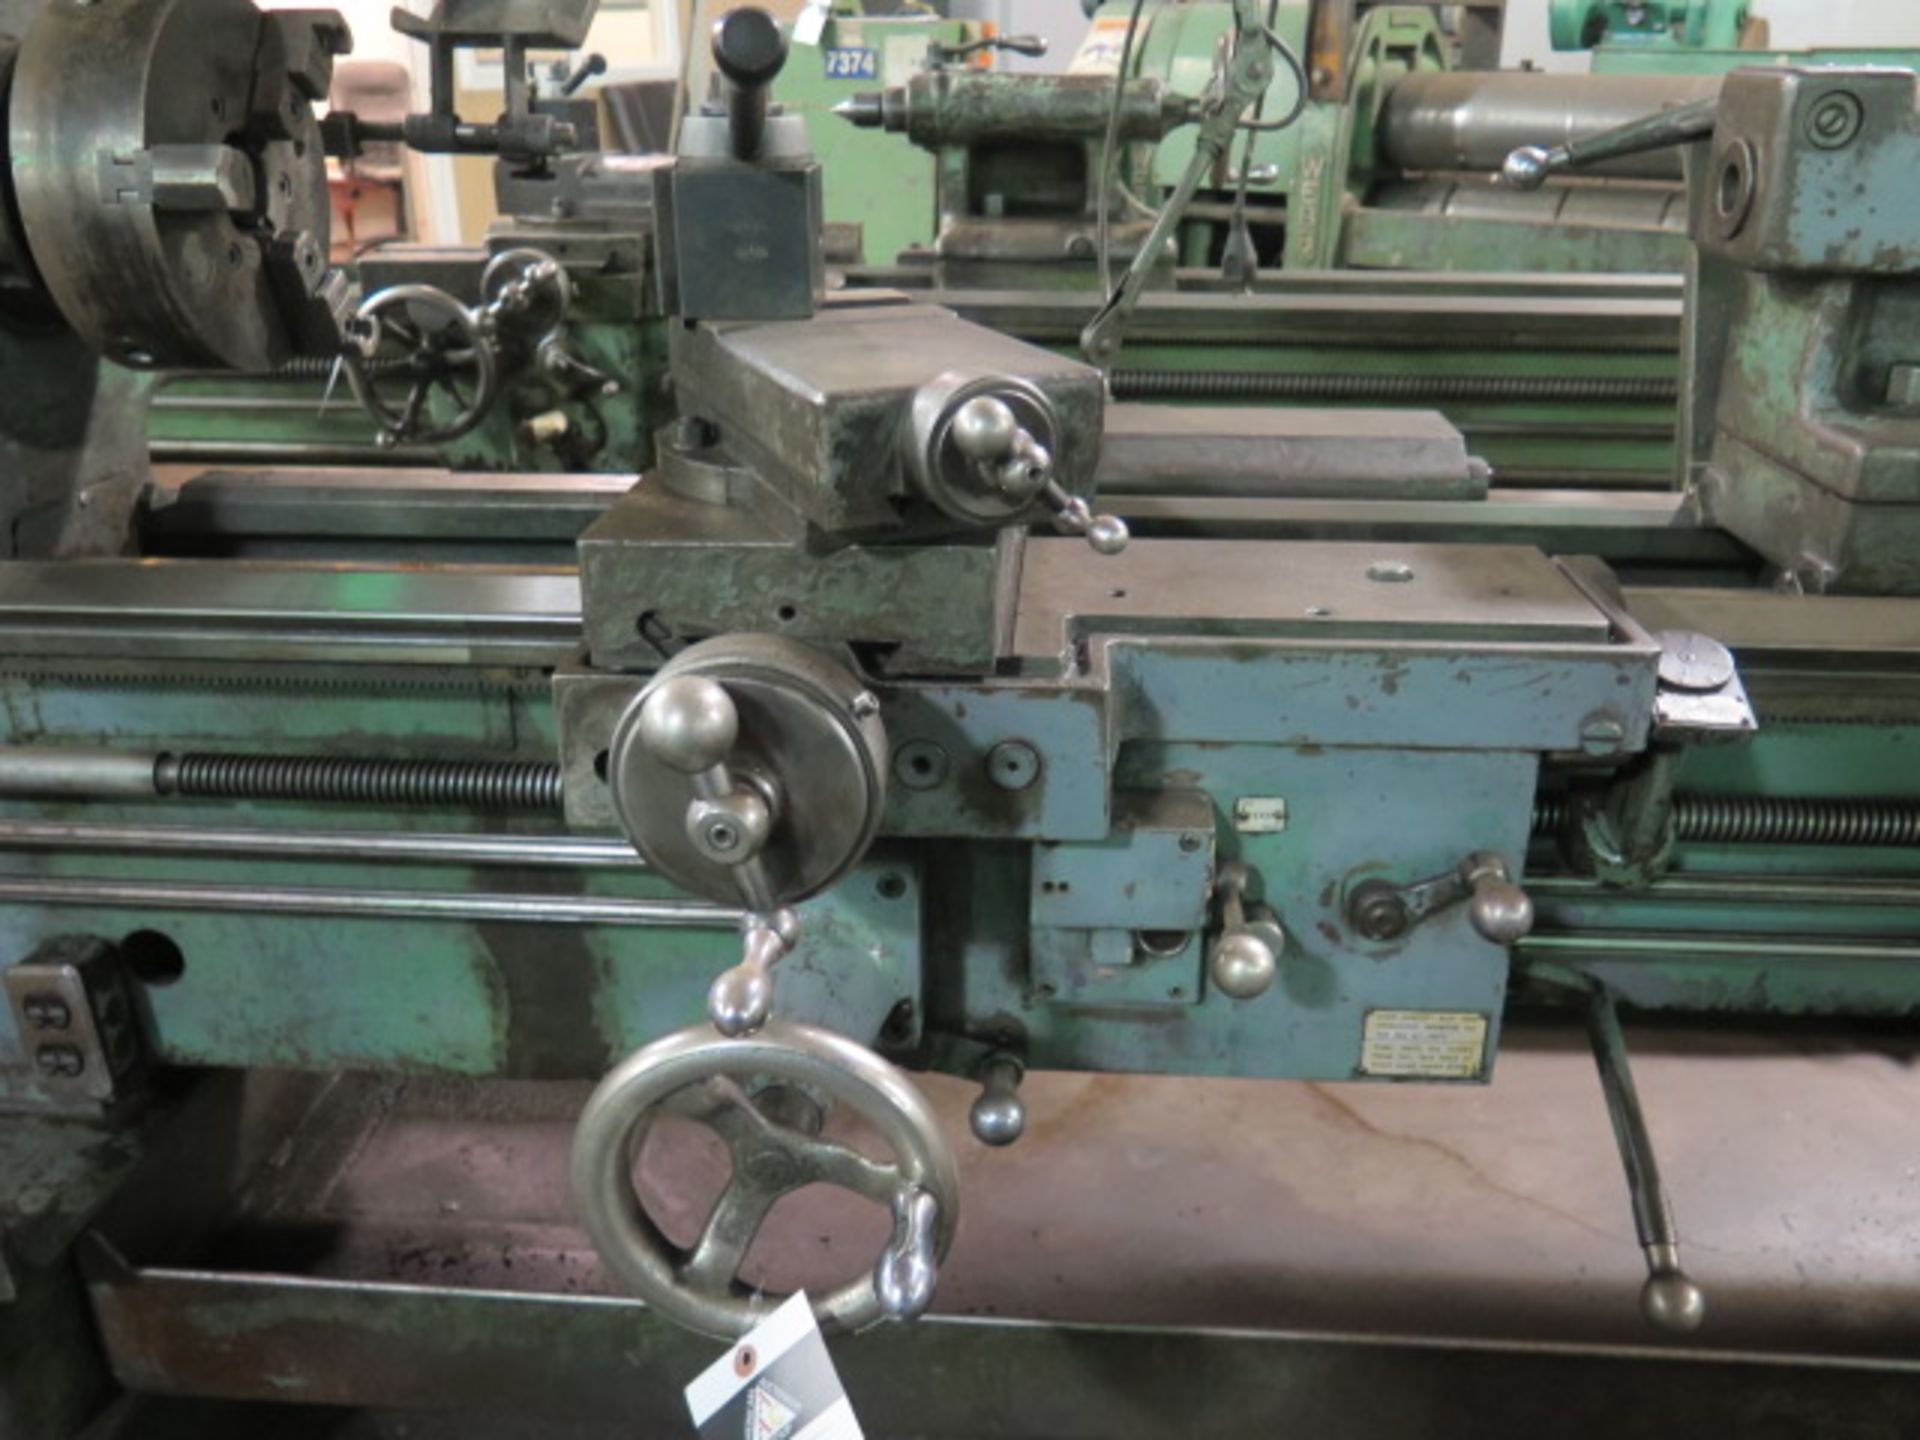 LeBlond Regal 19” x 58” Geared Head Lathe w/ 40-1600 RPM, Inch Threading, Tailstock, SOLD AS IS - Image 3 of 14